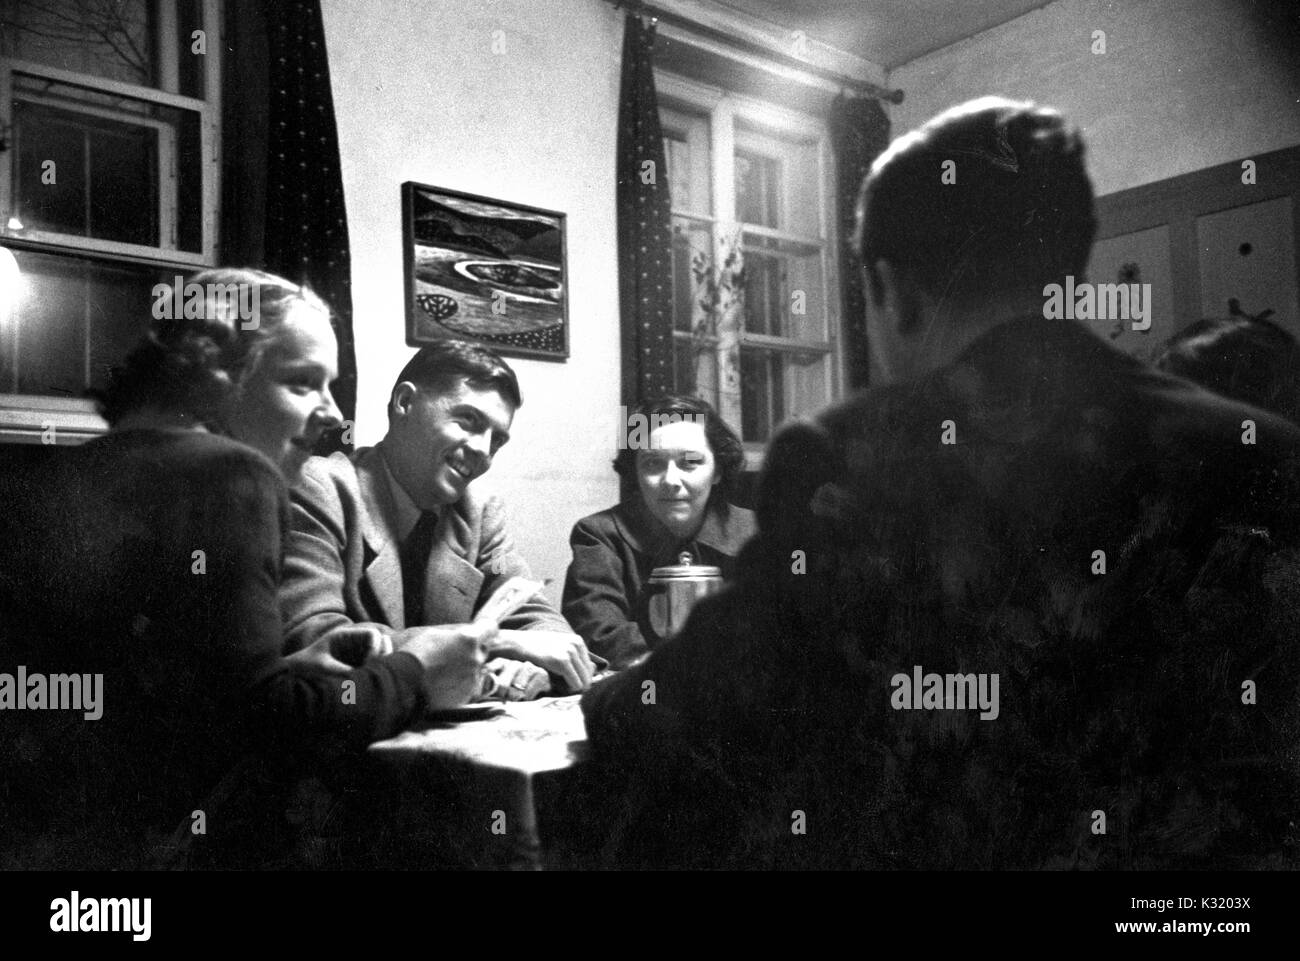 Sepia candid photograph of John Richard Cary, professor of German literature at Johns Hopkins University and ardent Quaker, smiling while seated at a table with a group of male and female students, Munich, Germany, March, 1954. Stock Photo